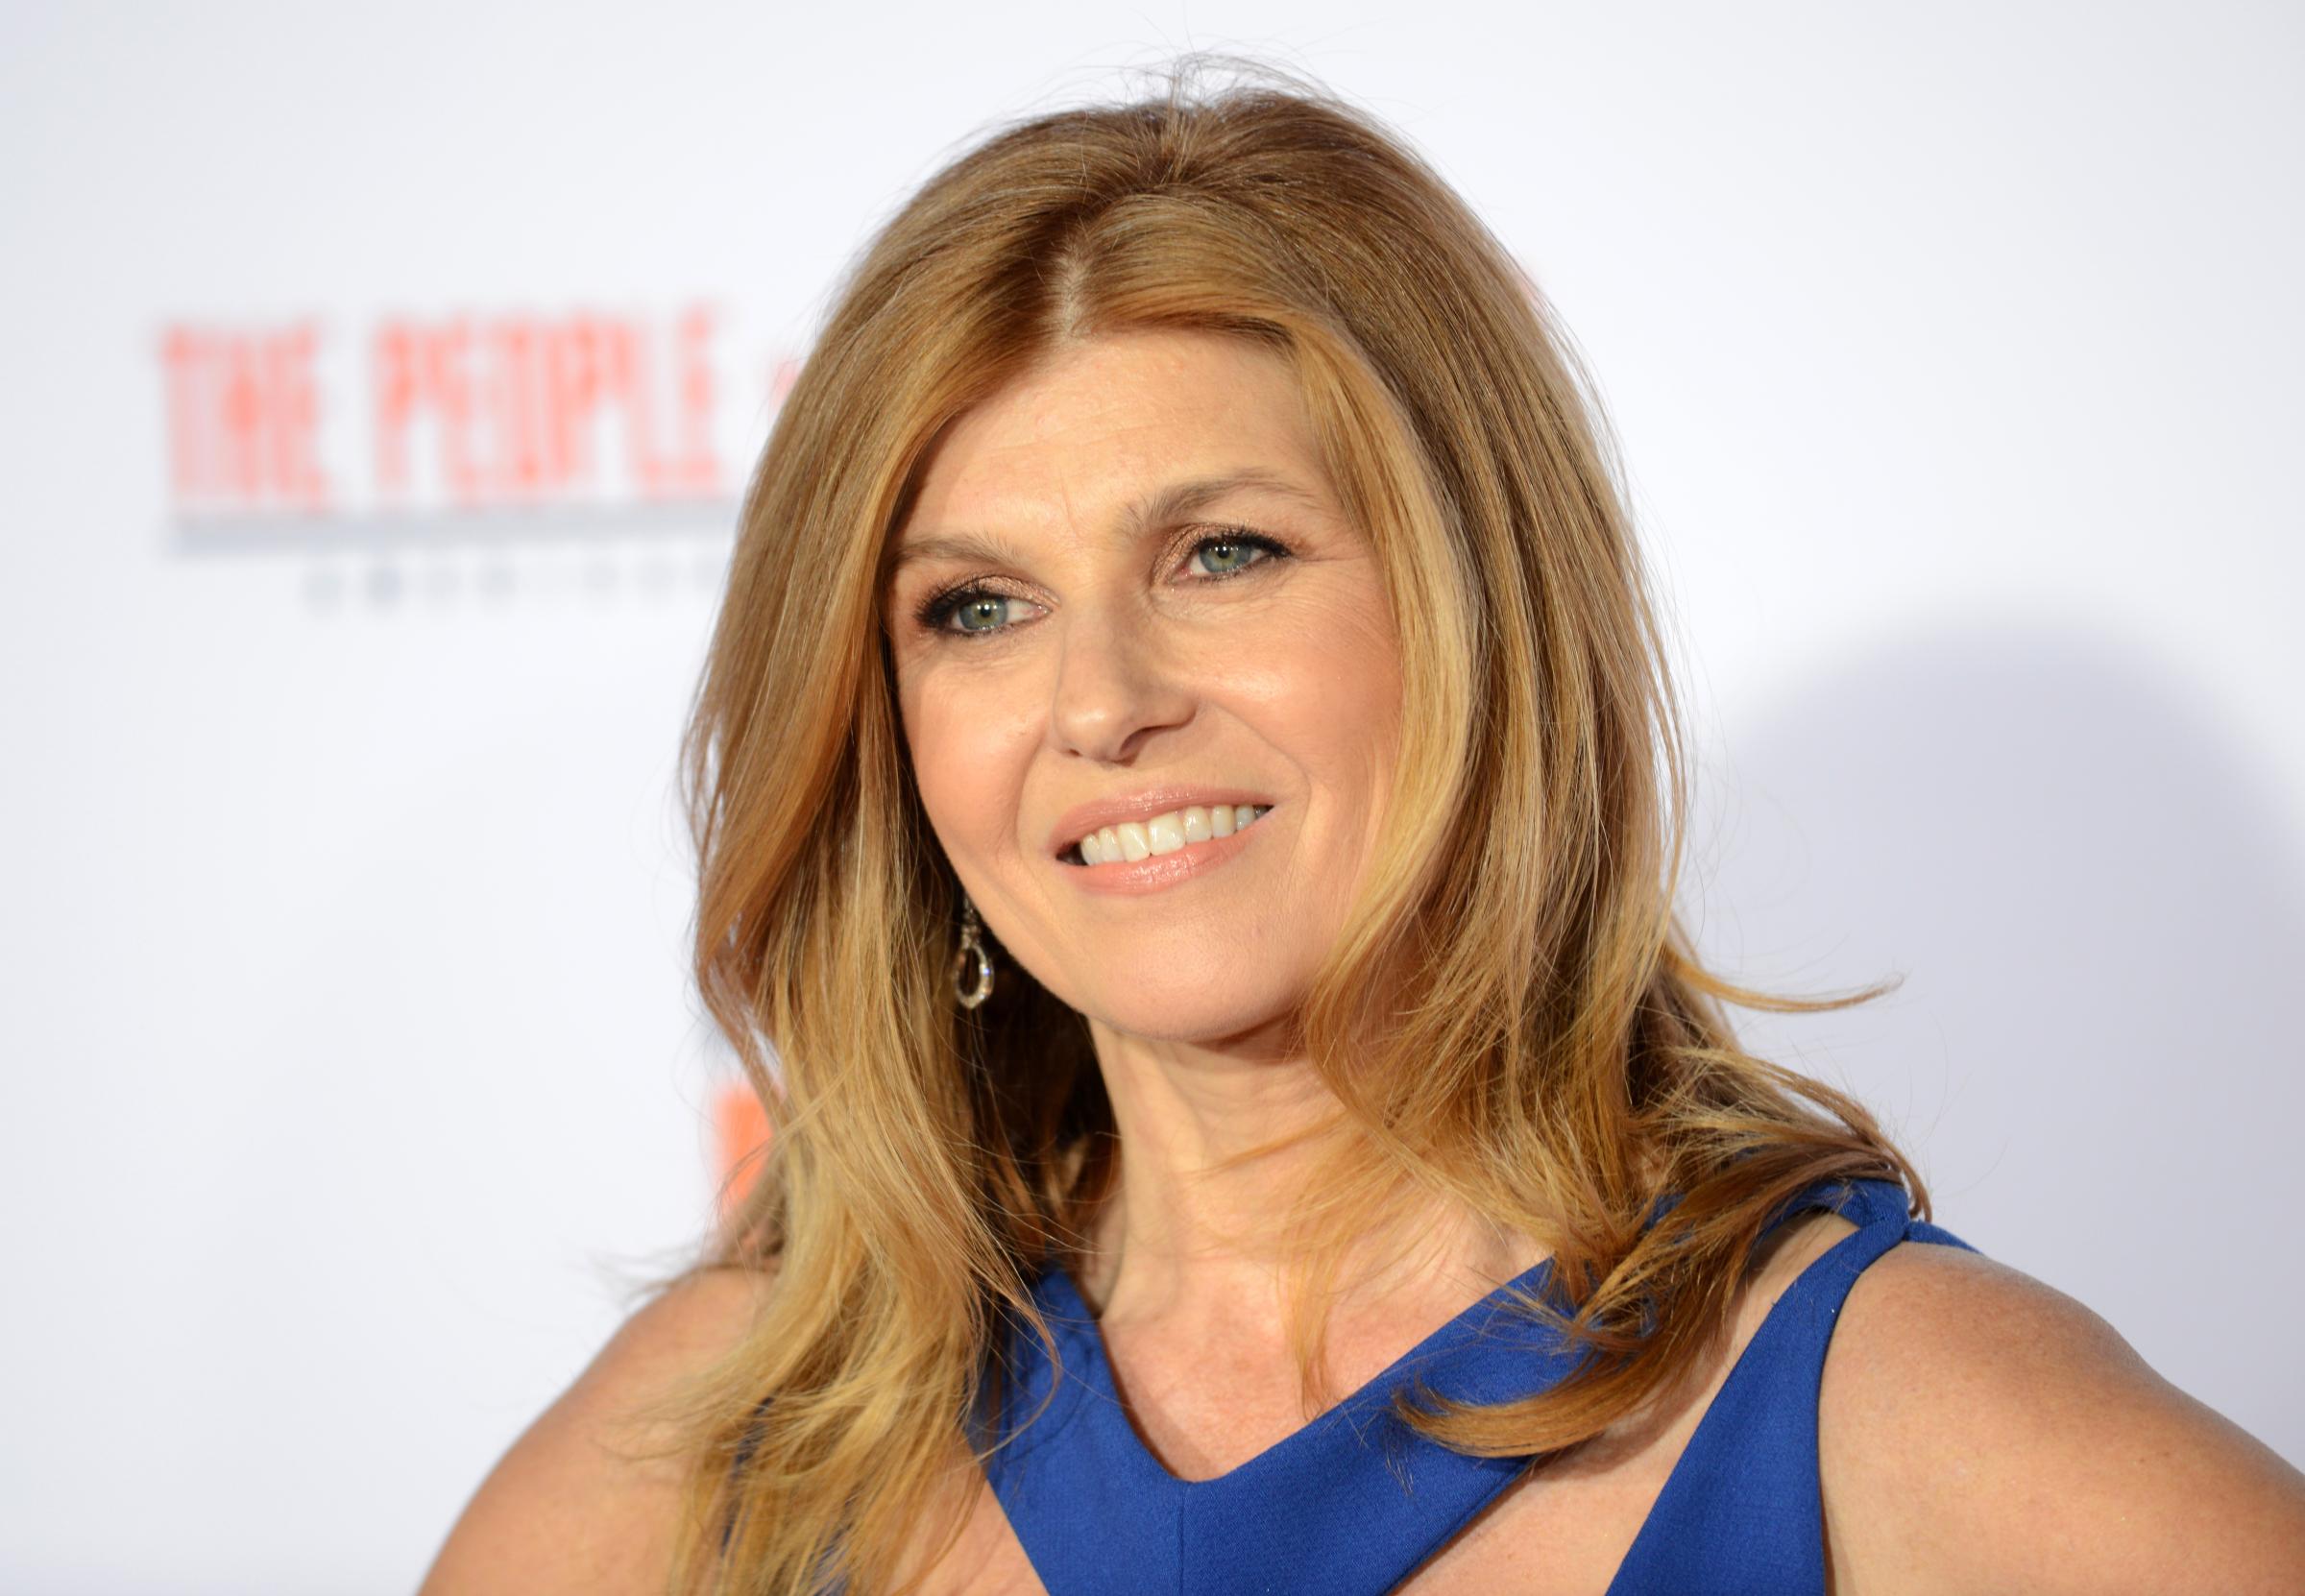 Connie Britton arrives for Premiere Of "FX's "American Crime Story - The People V. O.J. Simpson" held at Westwood Village Theatre on January 27, 2016 in Westwood, California.